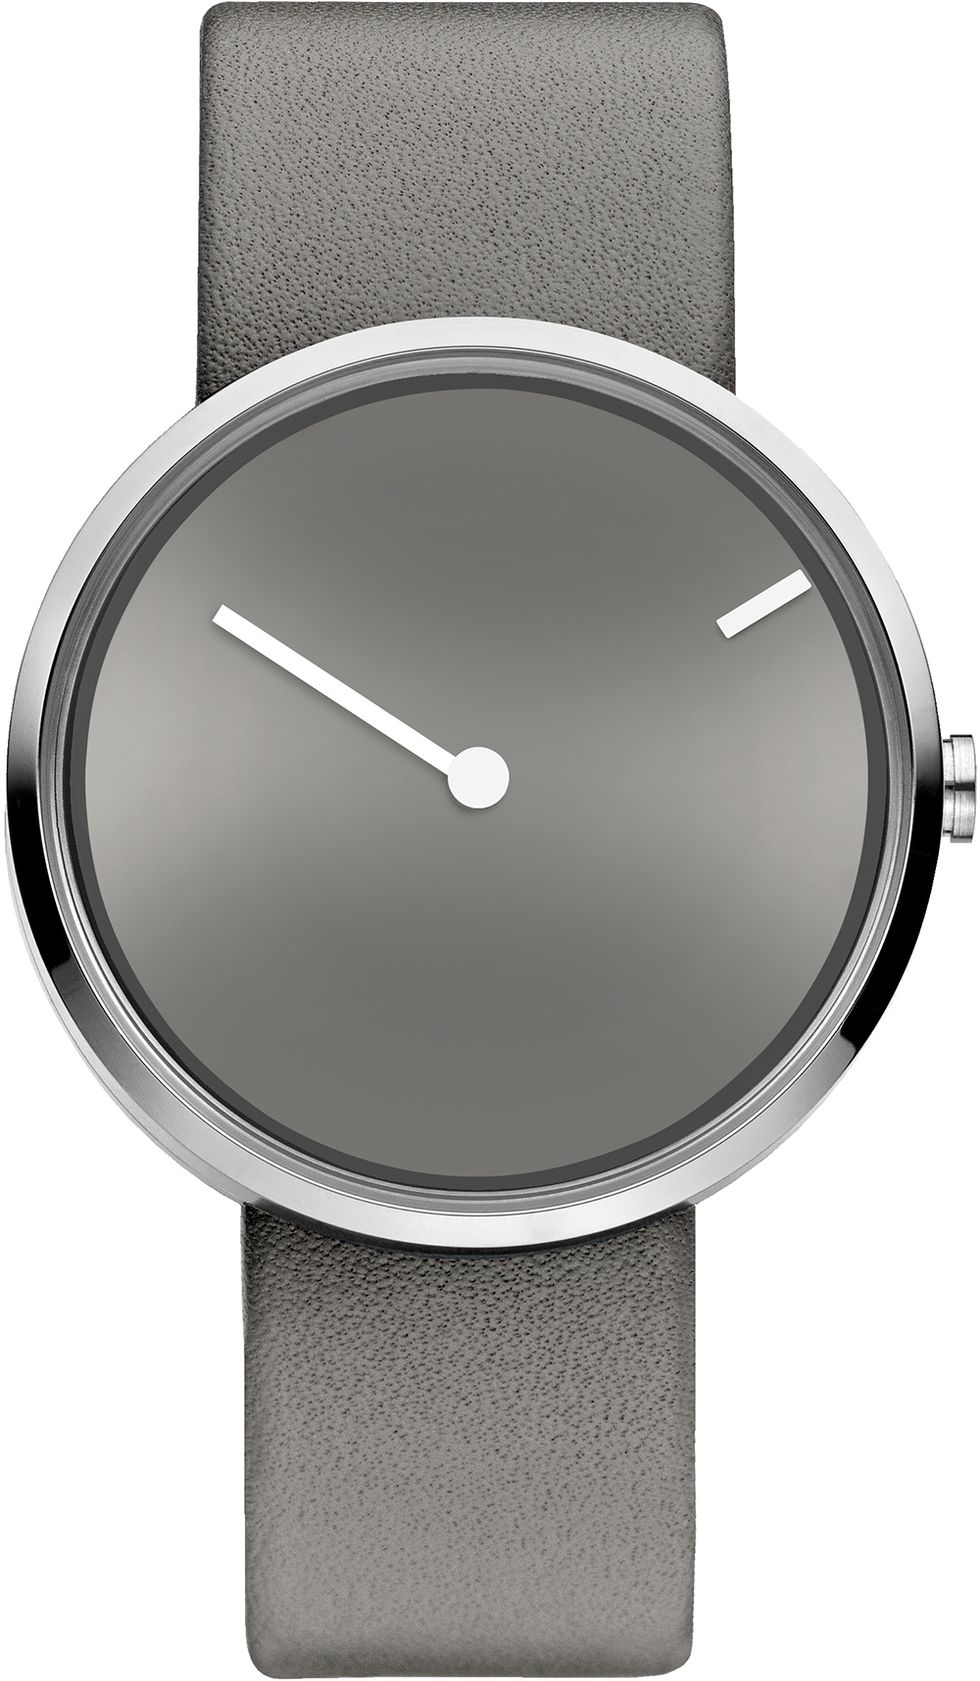 Product, Metal, Watch, Grey, Circle, Watch accessory, Steel, Technology, Silver, Still life photography, 